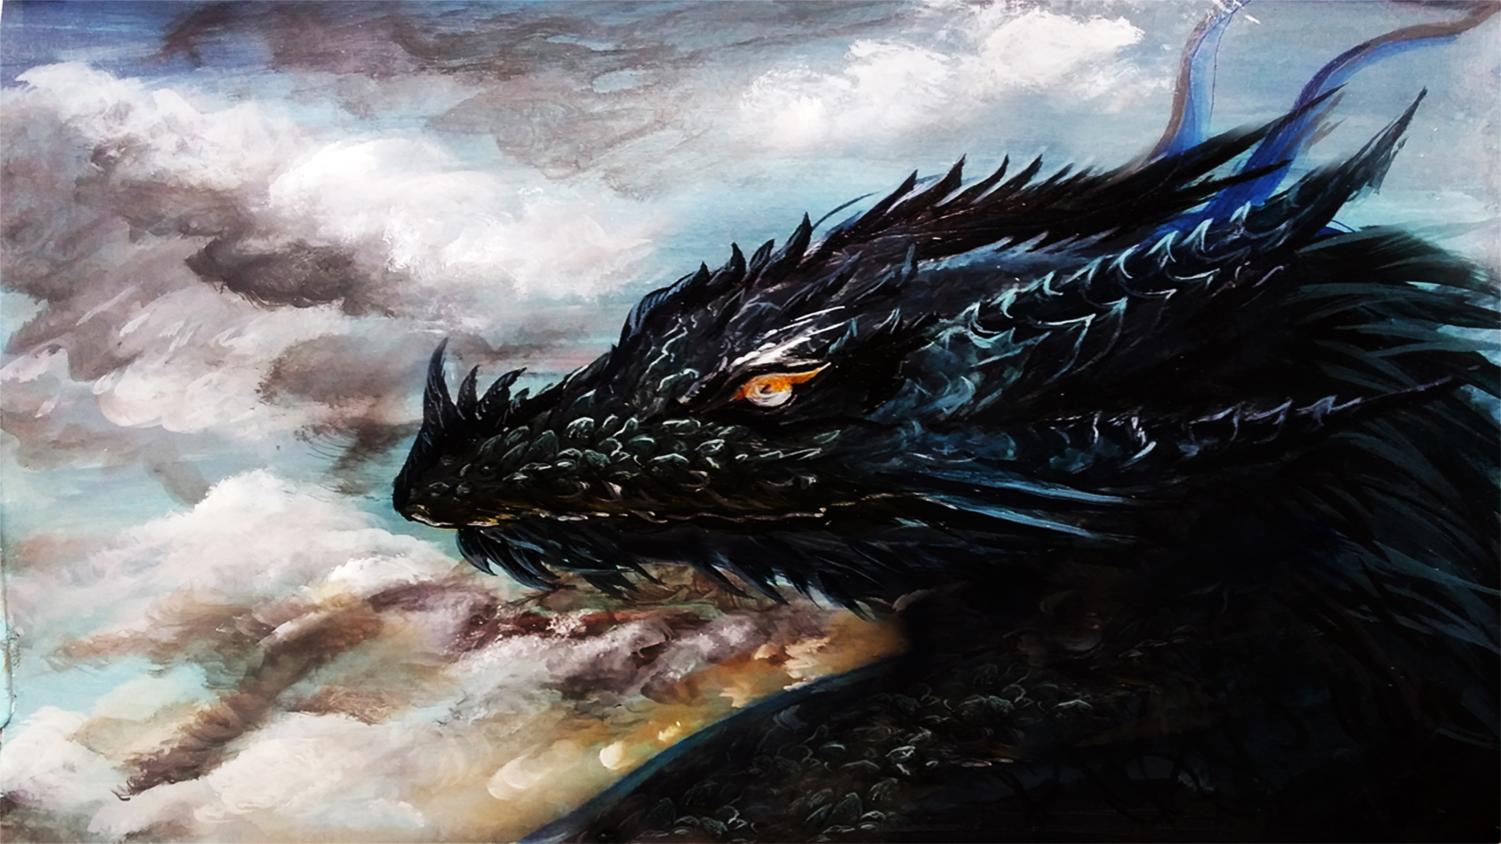 Facts and Lore about Dragons  Cool wallpapers dragon, Dragon